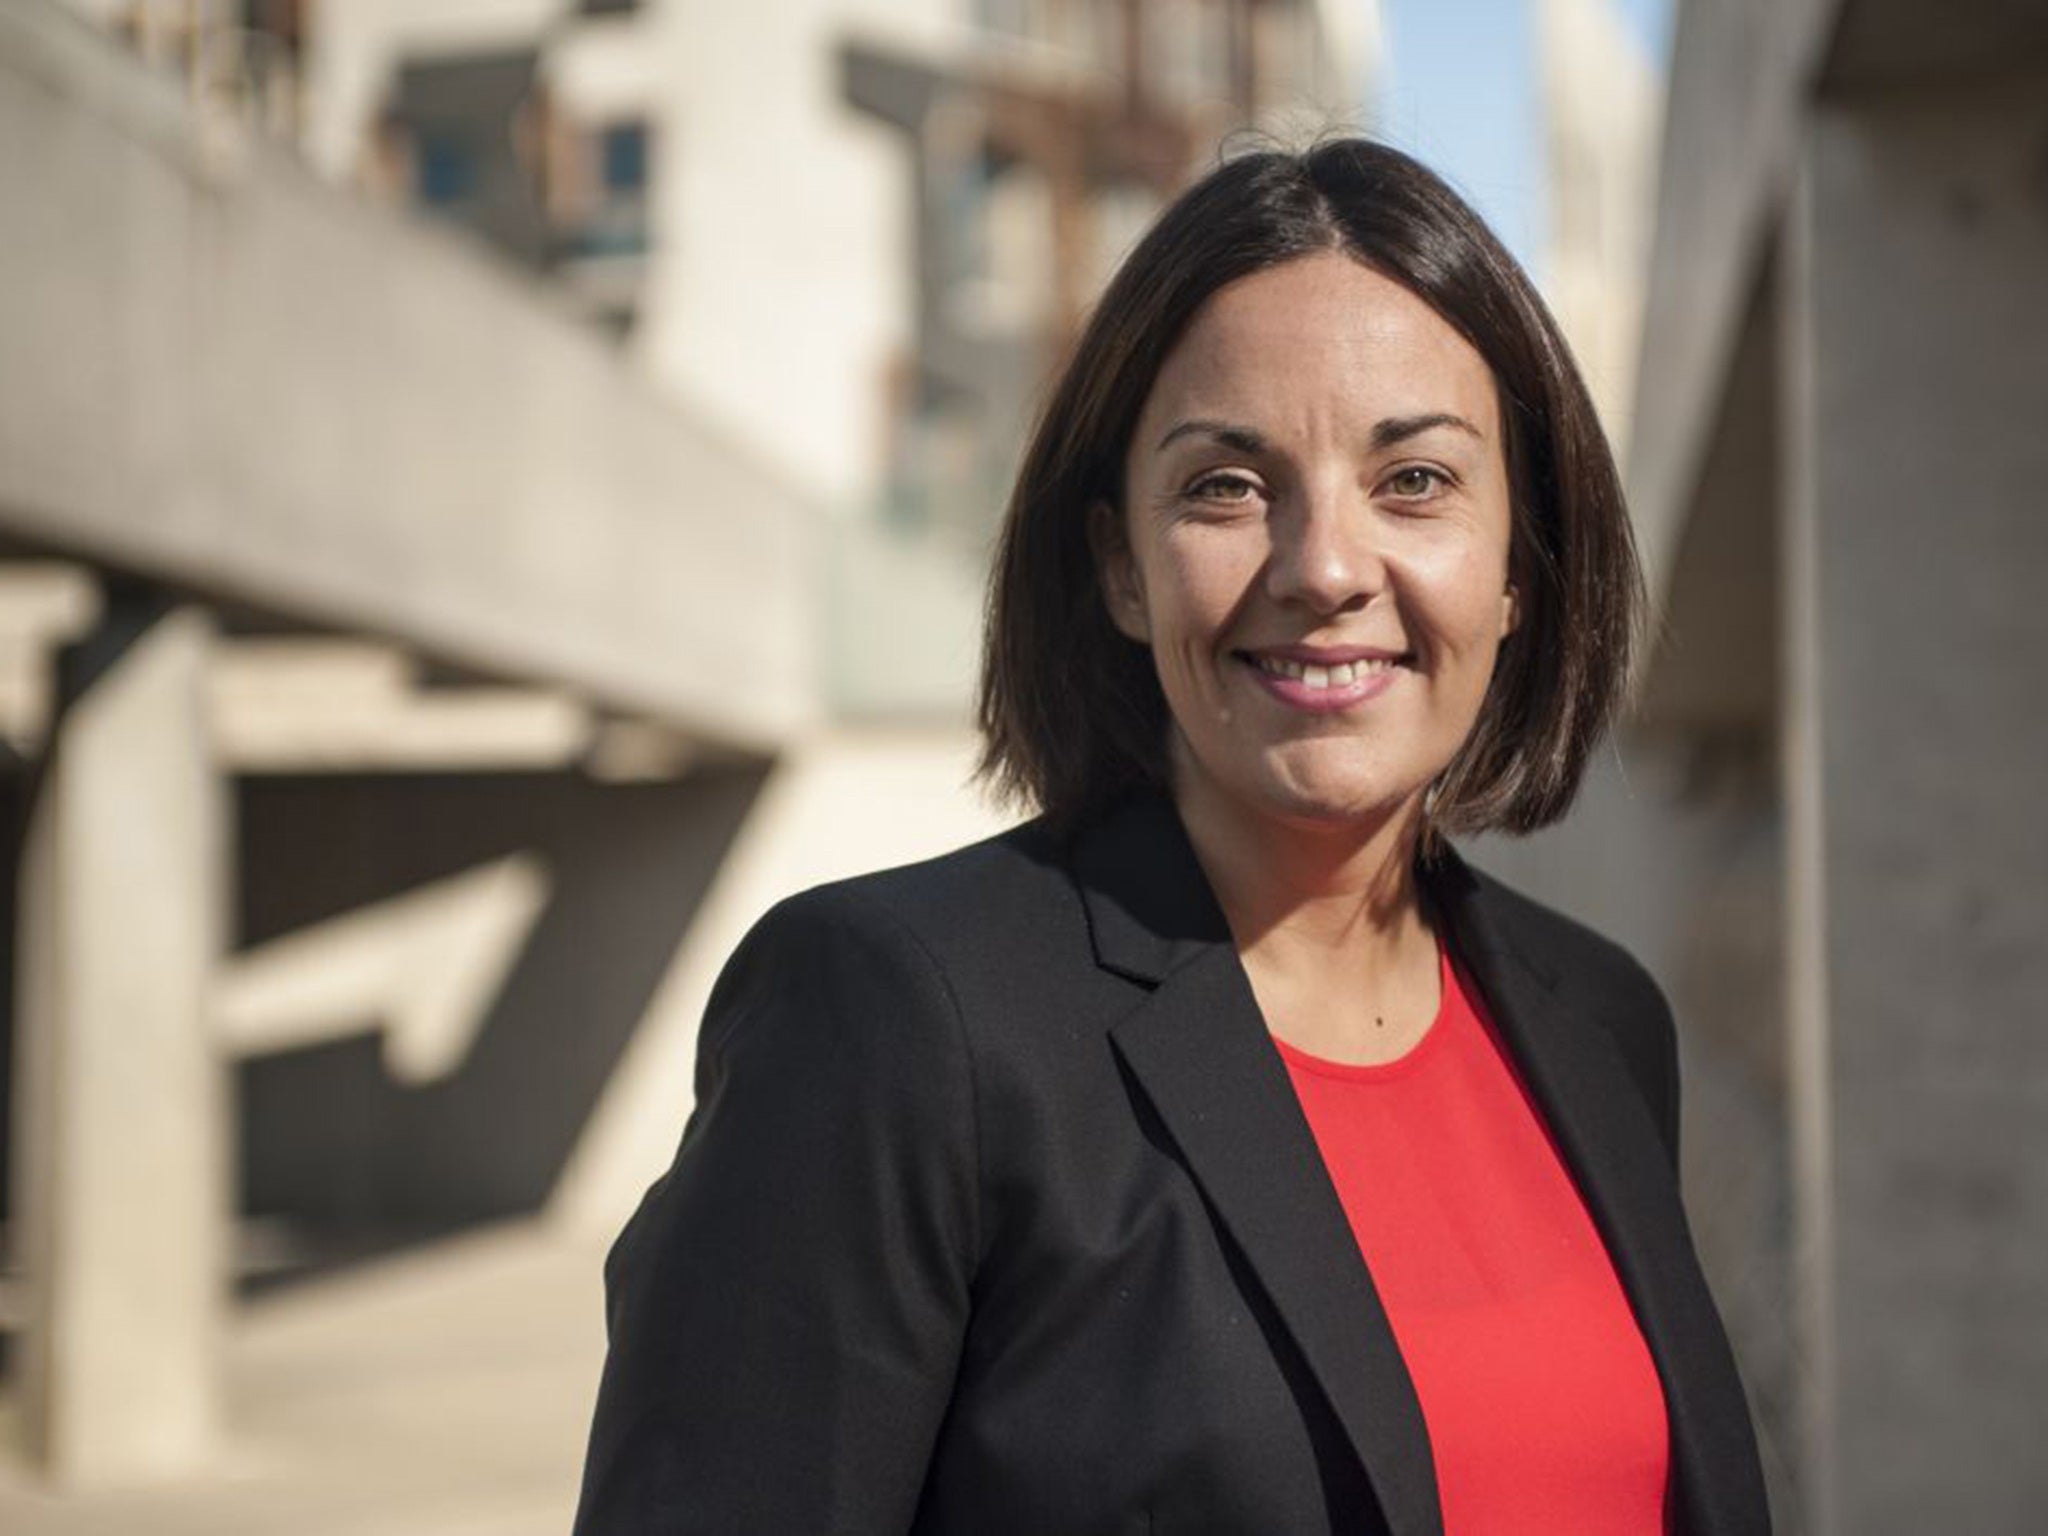 "We can’t wait for permission to take our place at the despatch box. We won’t be invited in, we have to take it for ourselves." Kezia Dugdale, Scottish Labour Leader